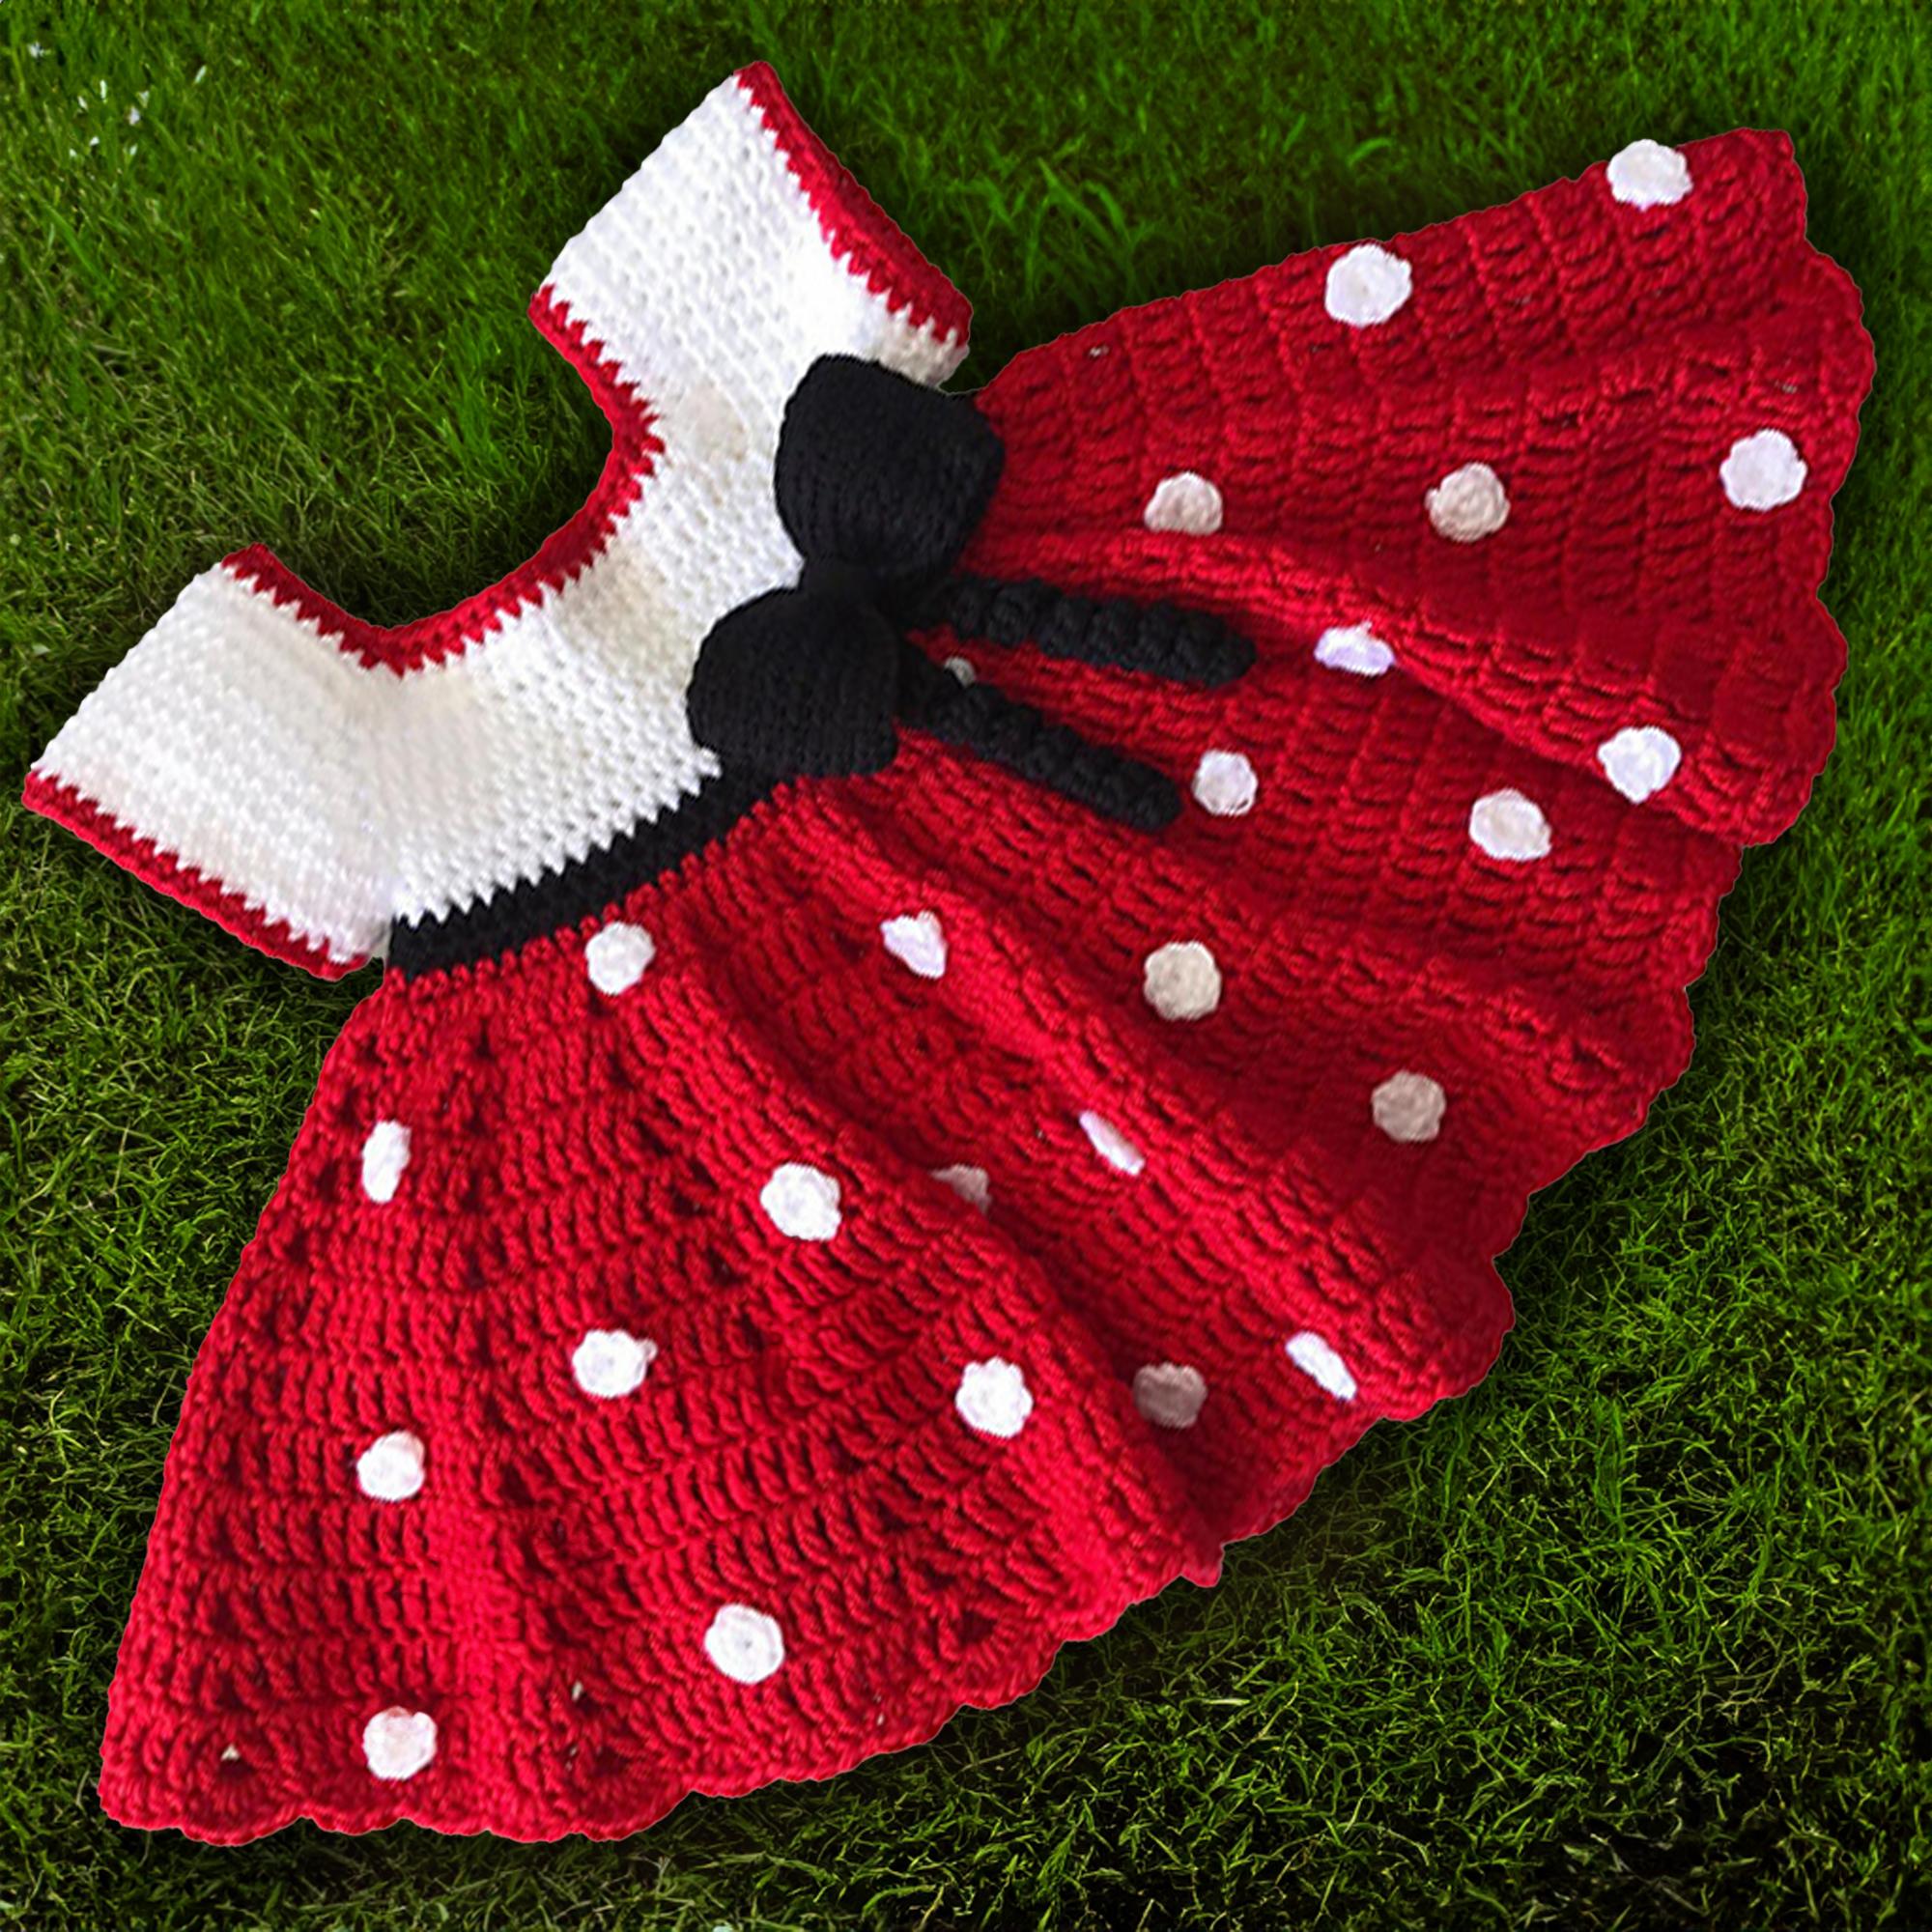 Merry Mouseketeer: Handcrafted Disney-Inspired Ensemble